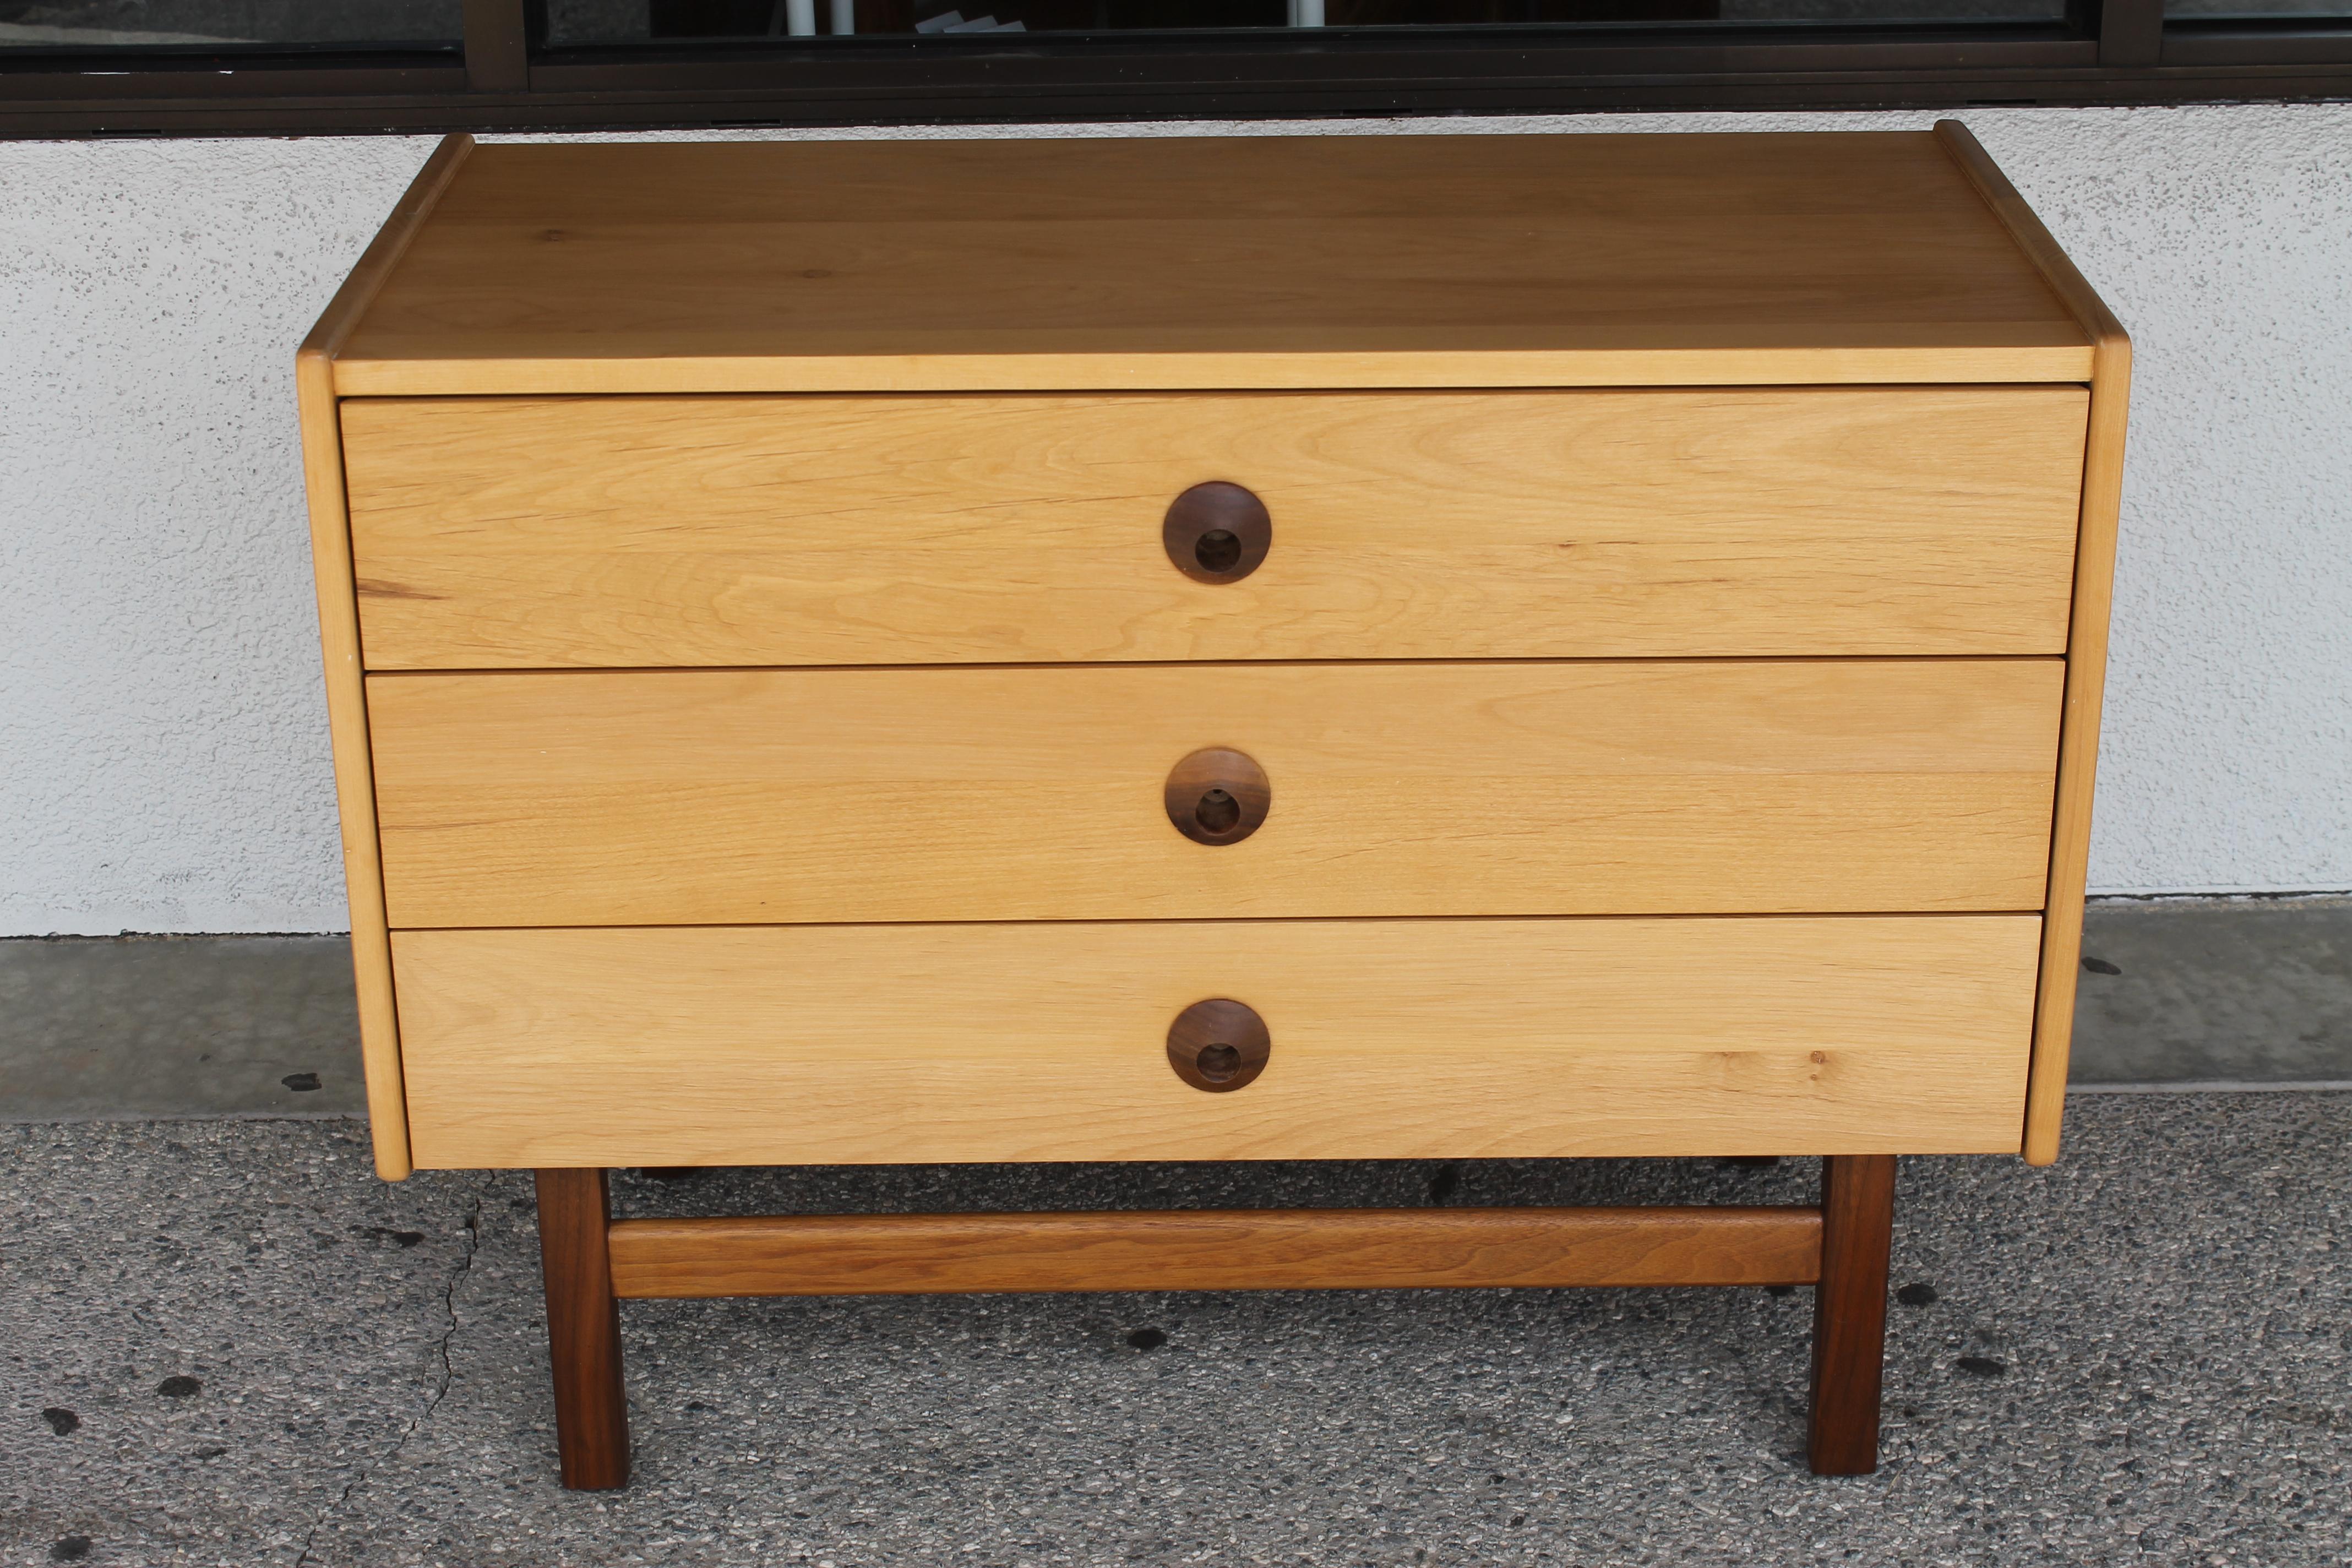 Midcentury dresser consisting of 3 drawers. Dresser has been professionally refinished including the inside of each drawer. Dresser measures 36.25